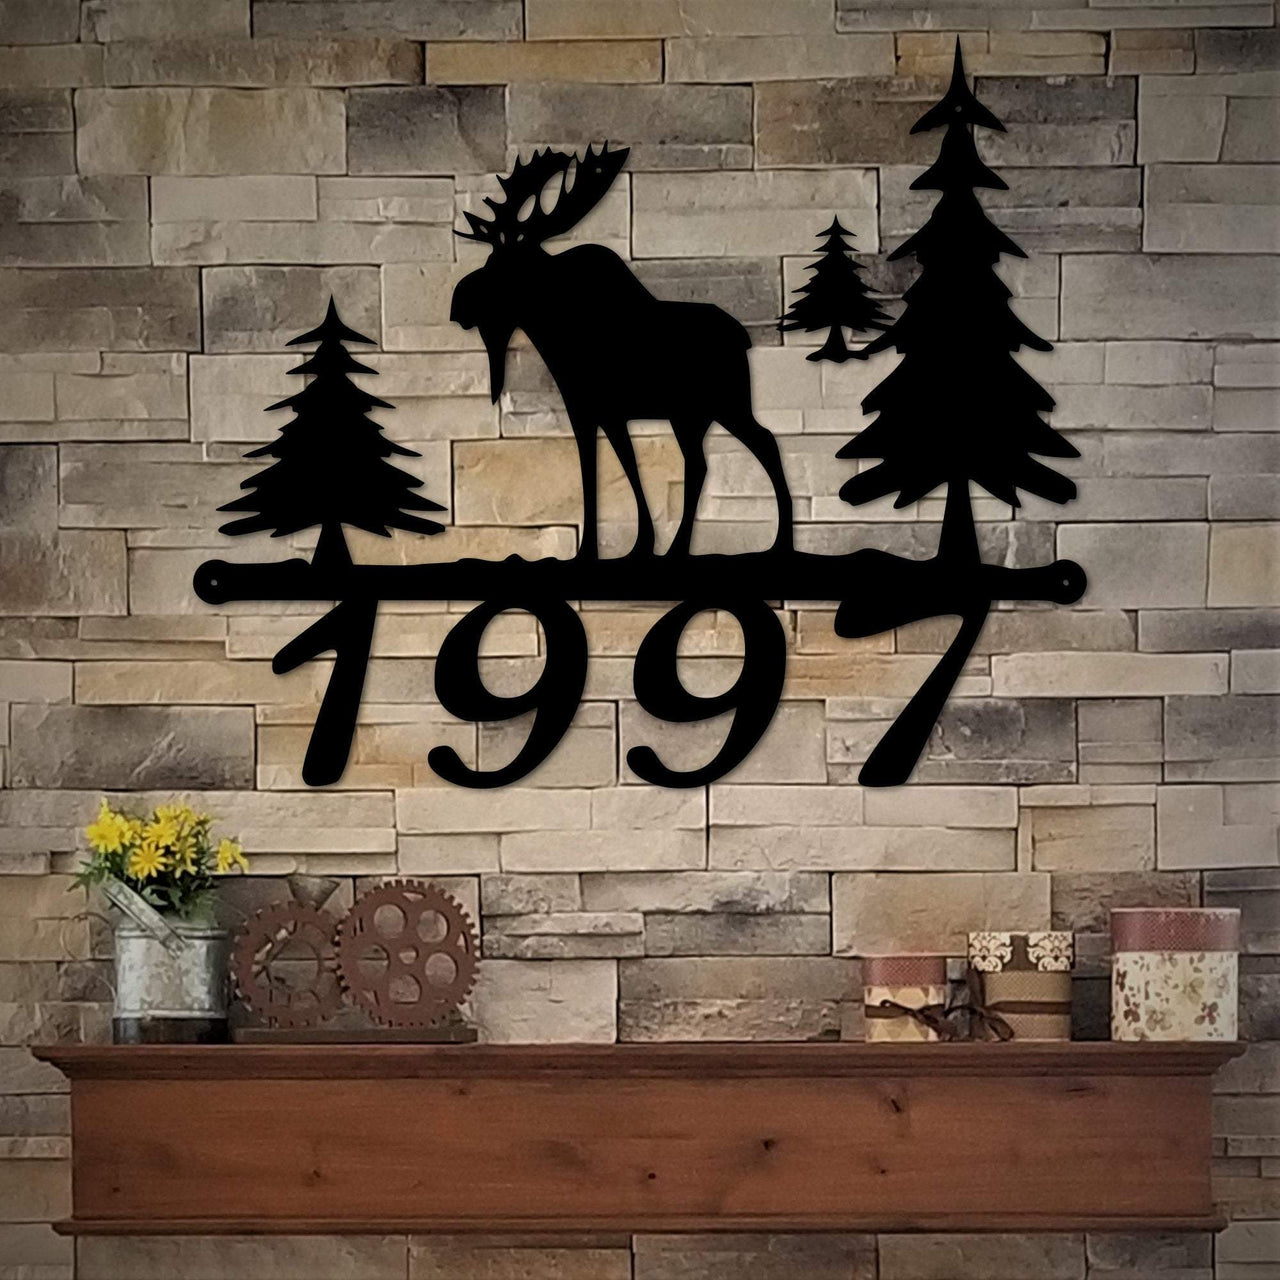 Wildlife Metal Address Marker with Moose and Pine Trees | Outdoor Metal Sign | Rustic Home Address Sign | Custom Metal Sign | Cabin Decor